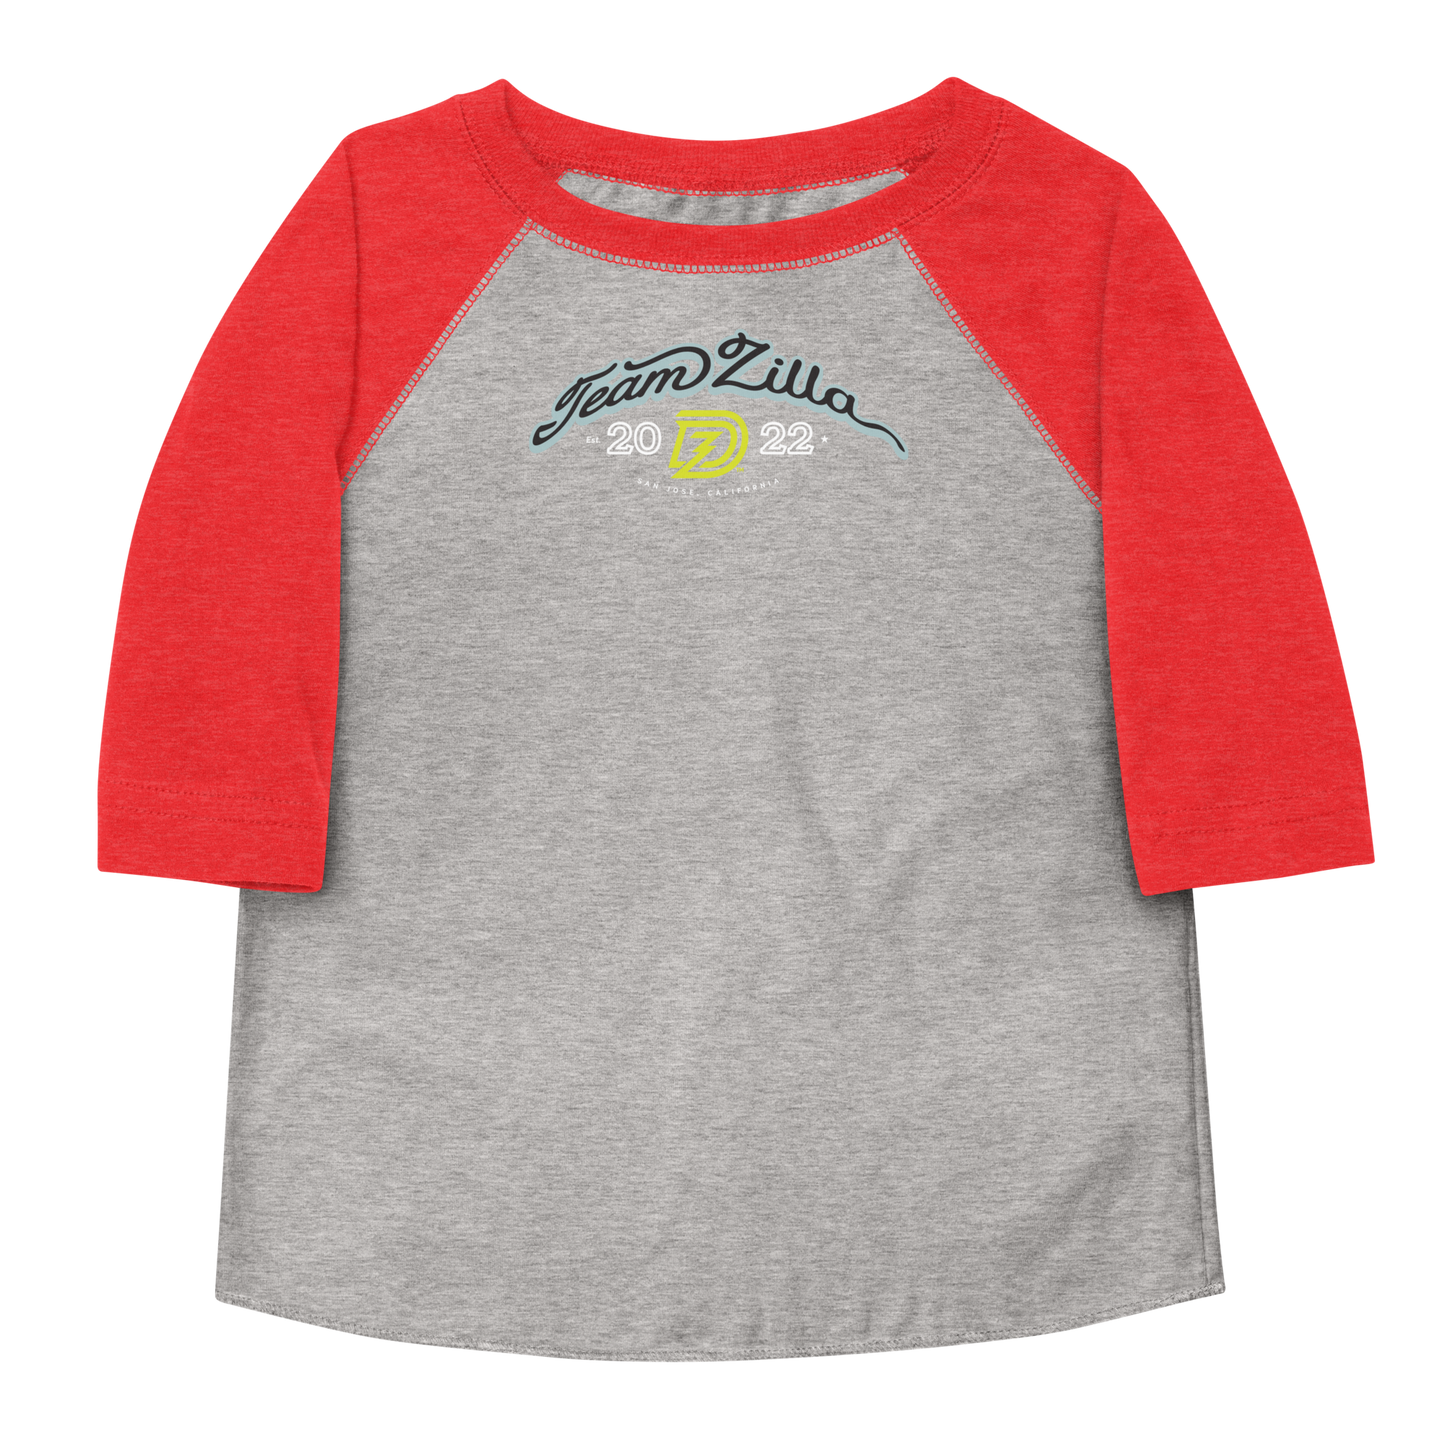 Team Zilla 2022 Toddler Shirt in Vintage Heather with Vintage Red Sleeves